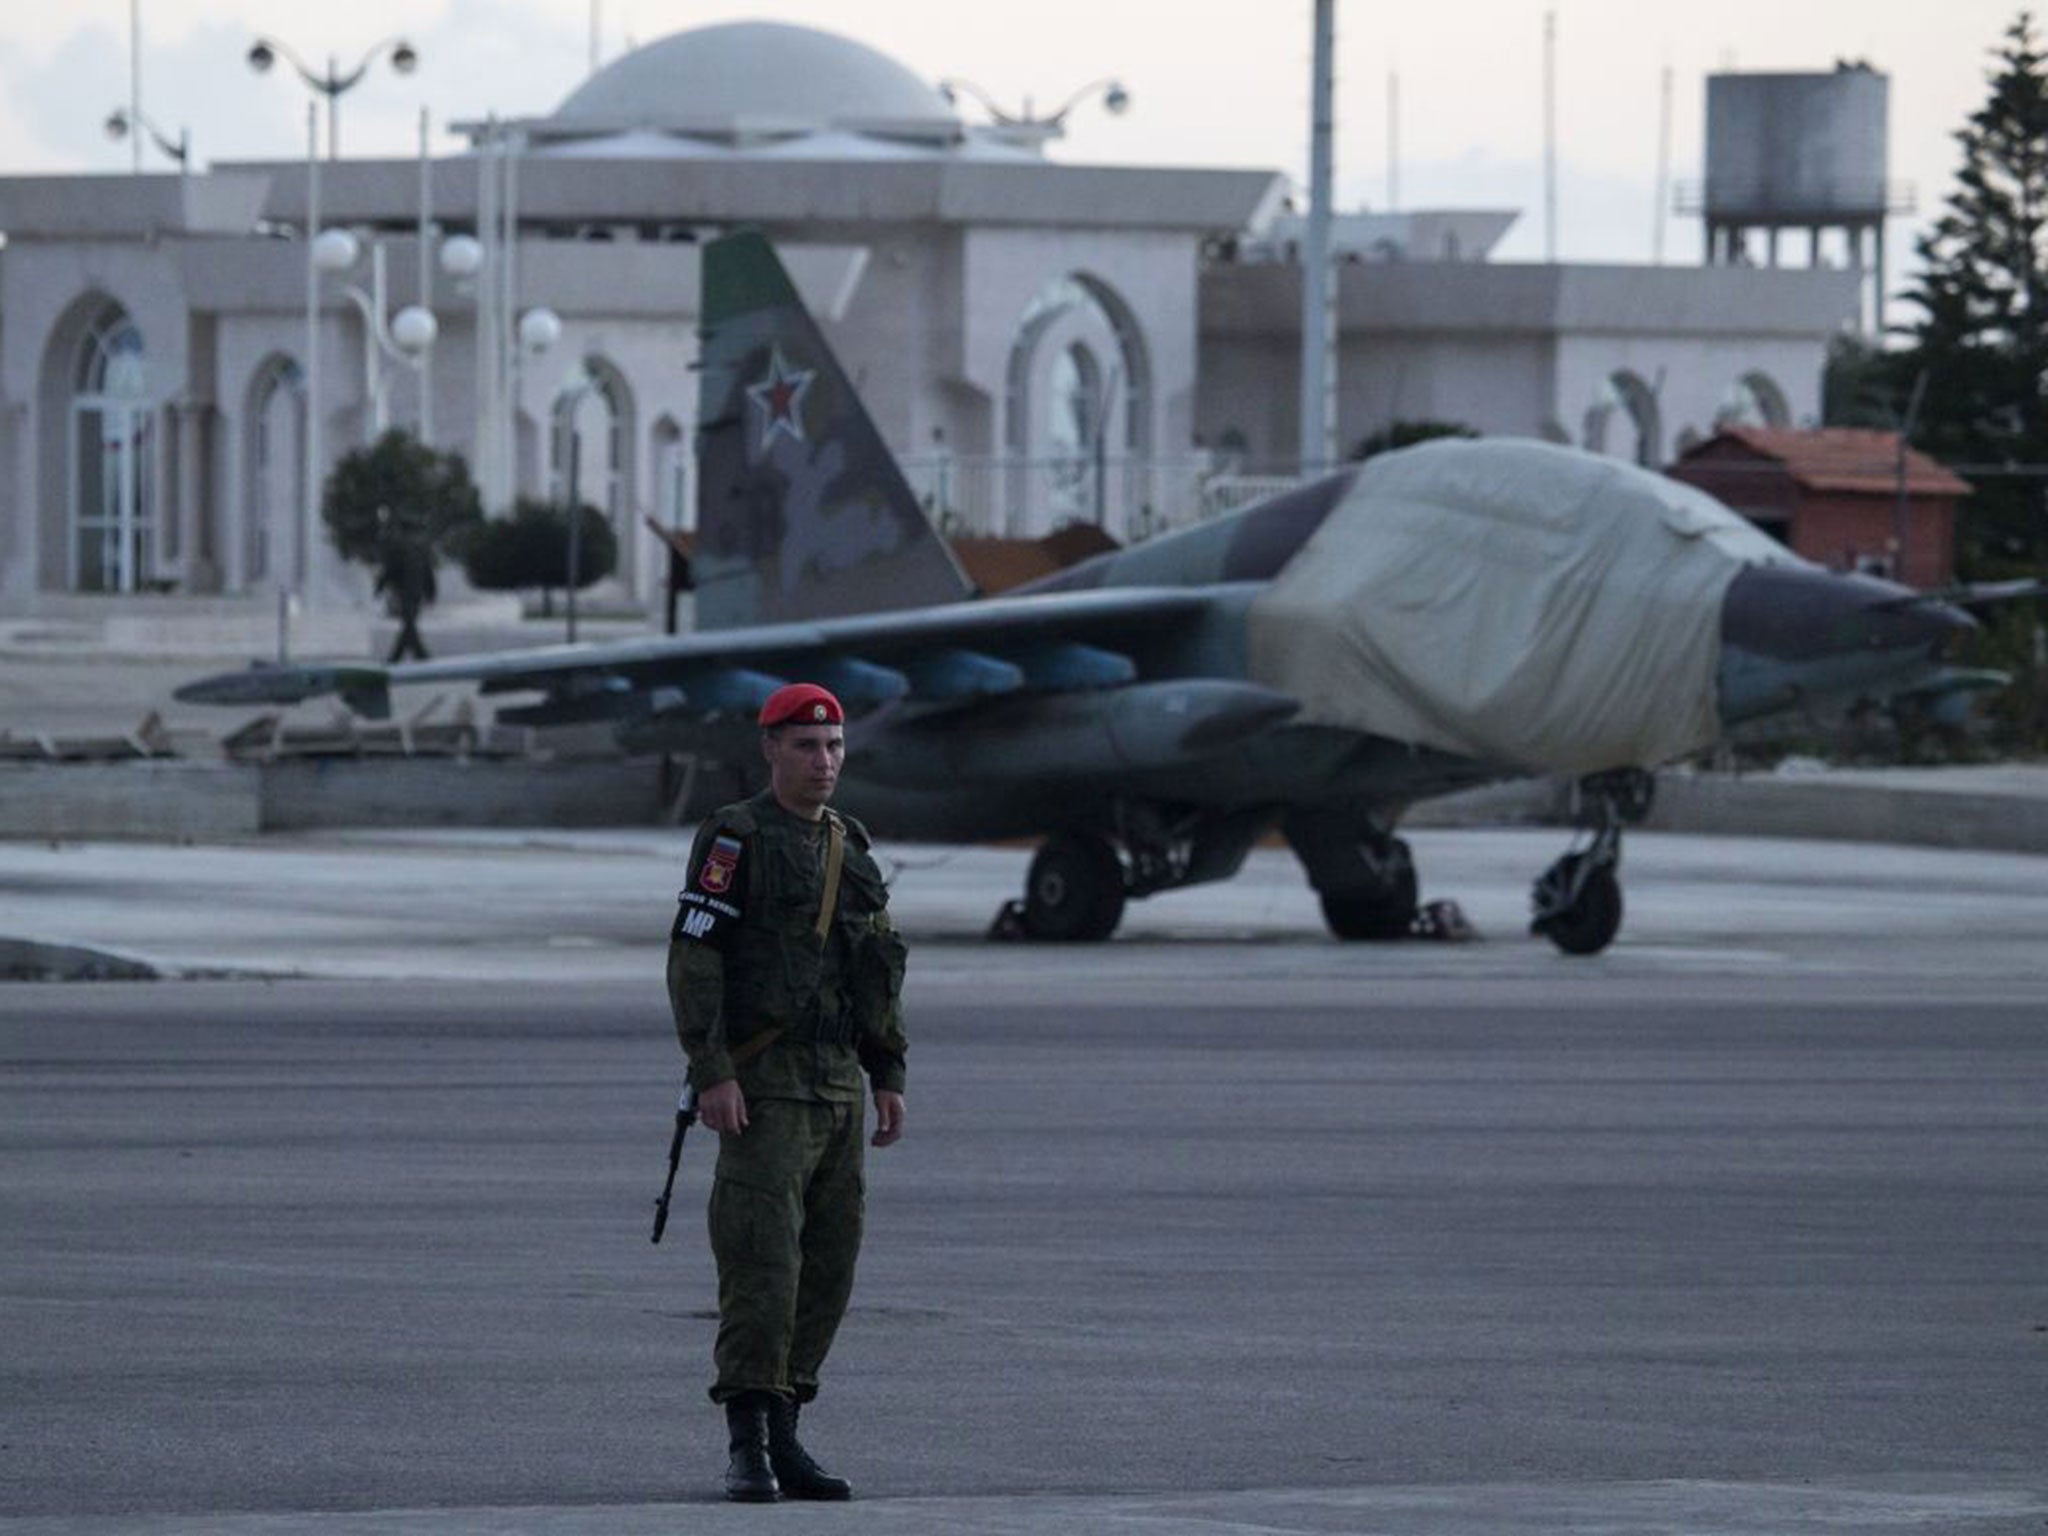 A Russian soldier guards a jet parked at Hemeimeem air base in Syria. Russian warplanes have mostly stayed on the ground since the cease-fire began